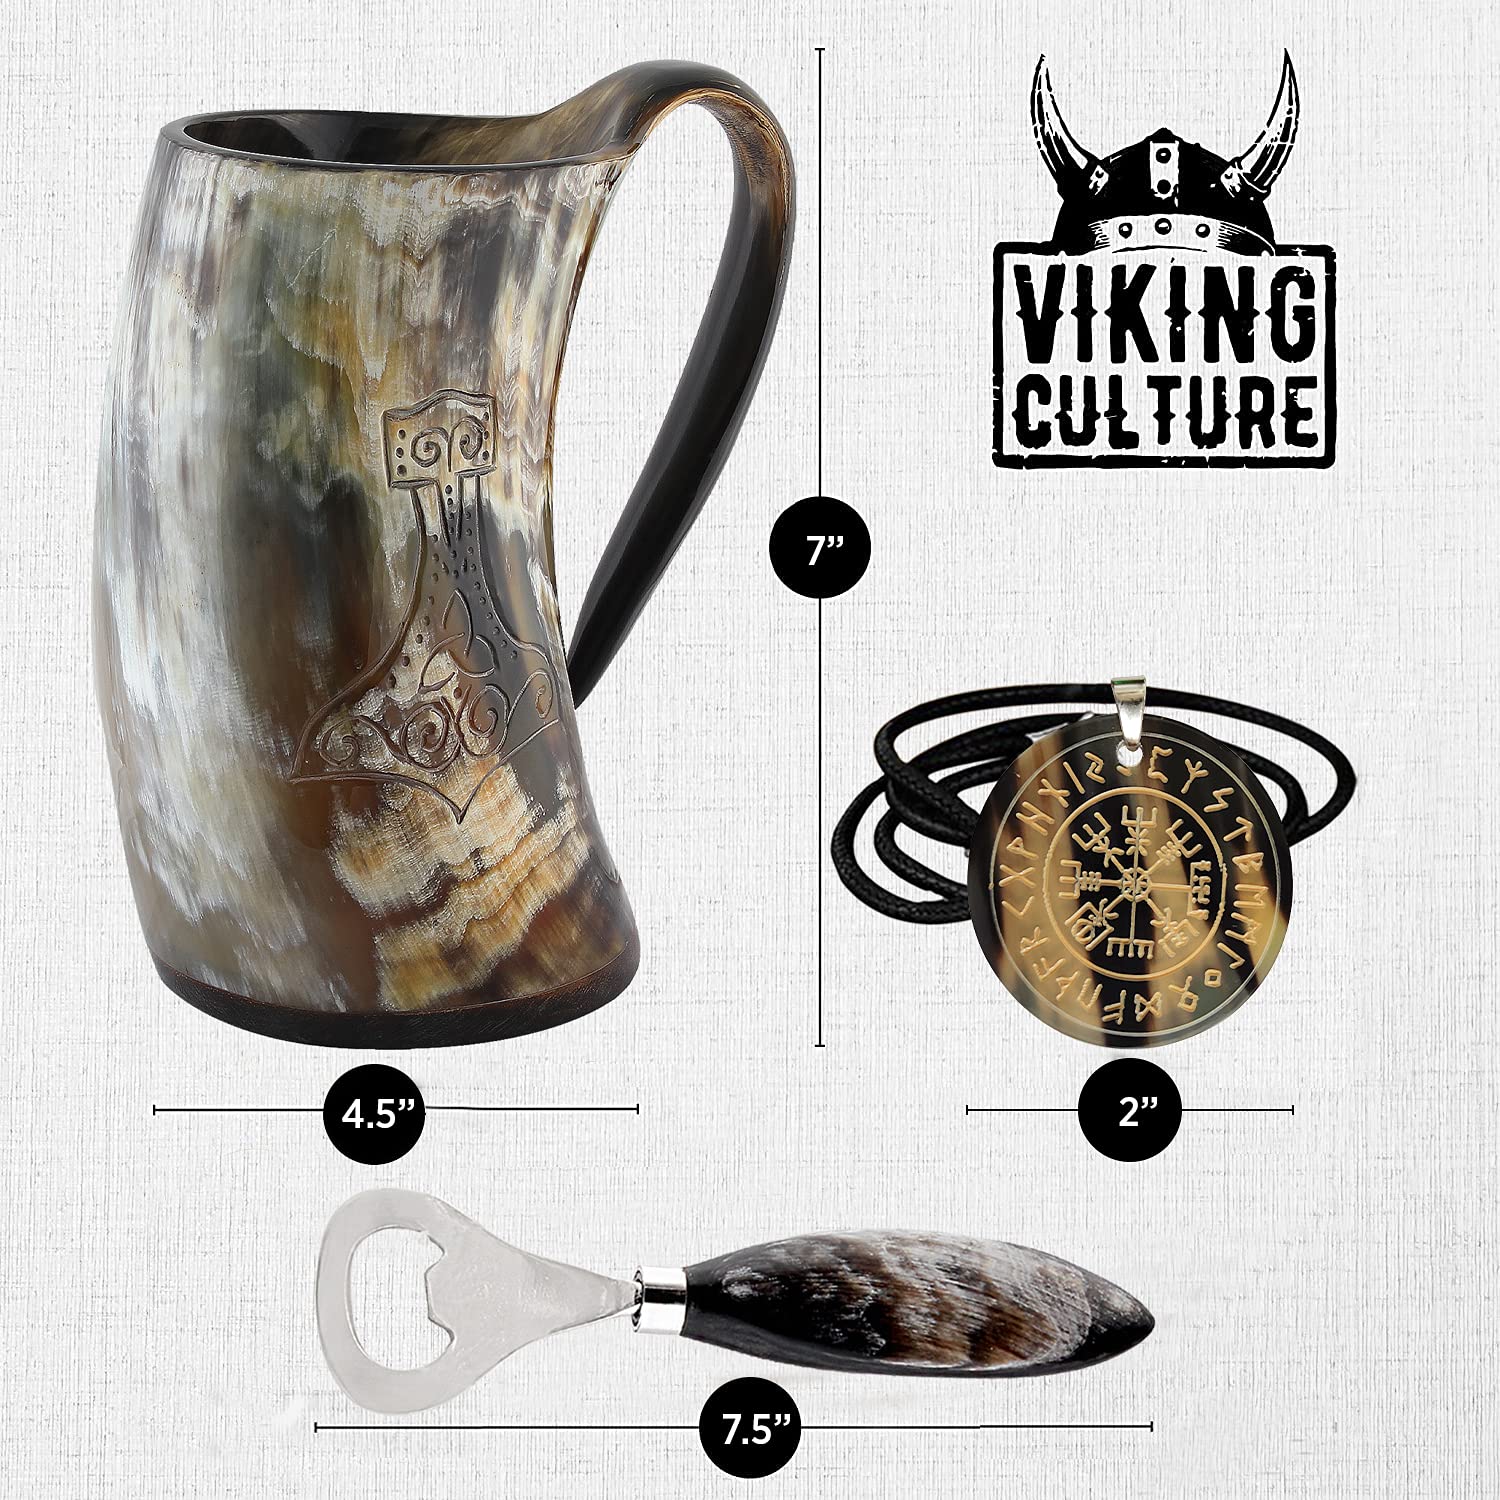 Trondebal Viking Drinking Horn Mug, 15-20 Oz Natural Ox Horn Cup & Cofee  Stein | Cool Unique Gift fo…See more Trondebal Viking Drinking Horn Mug